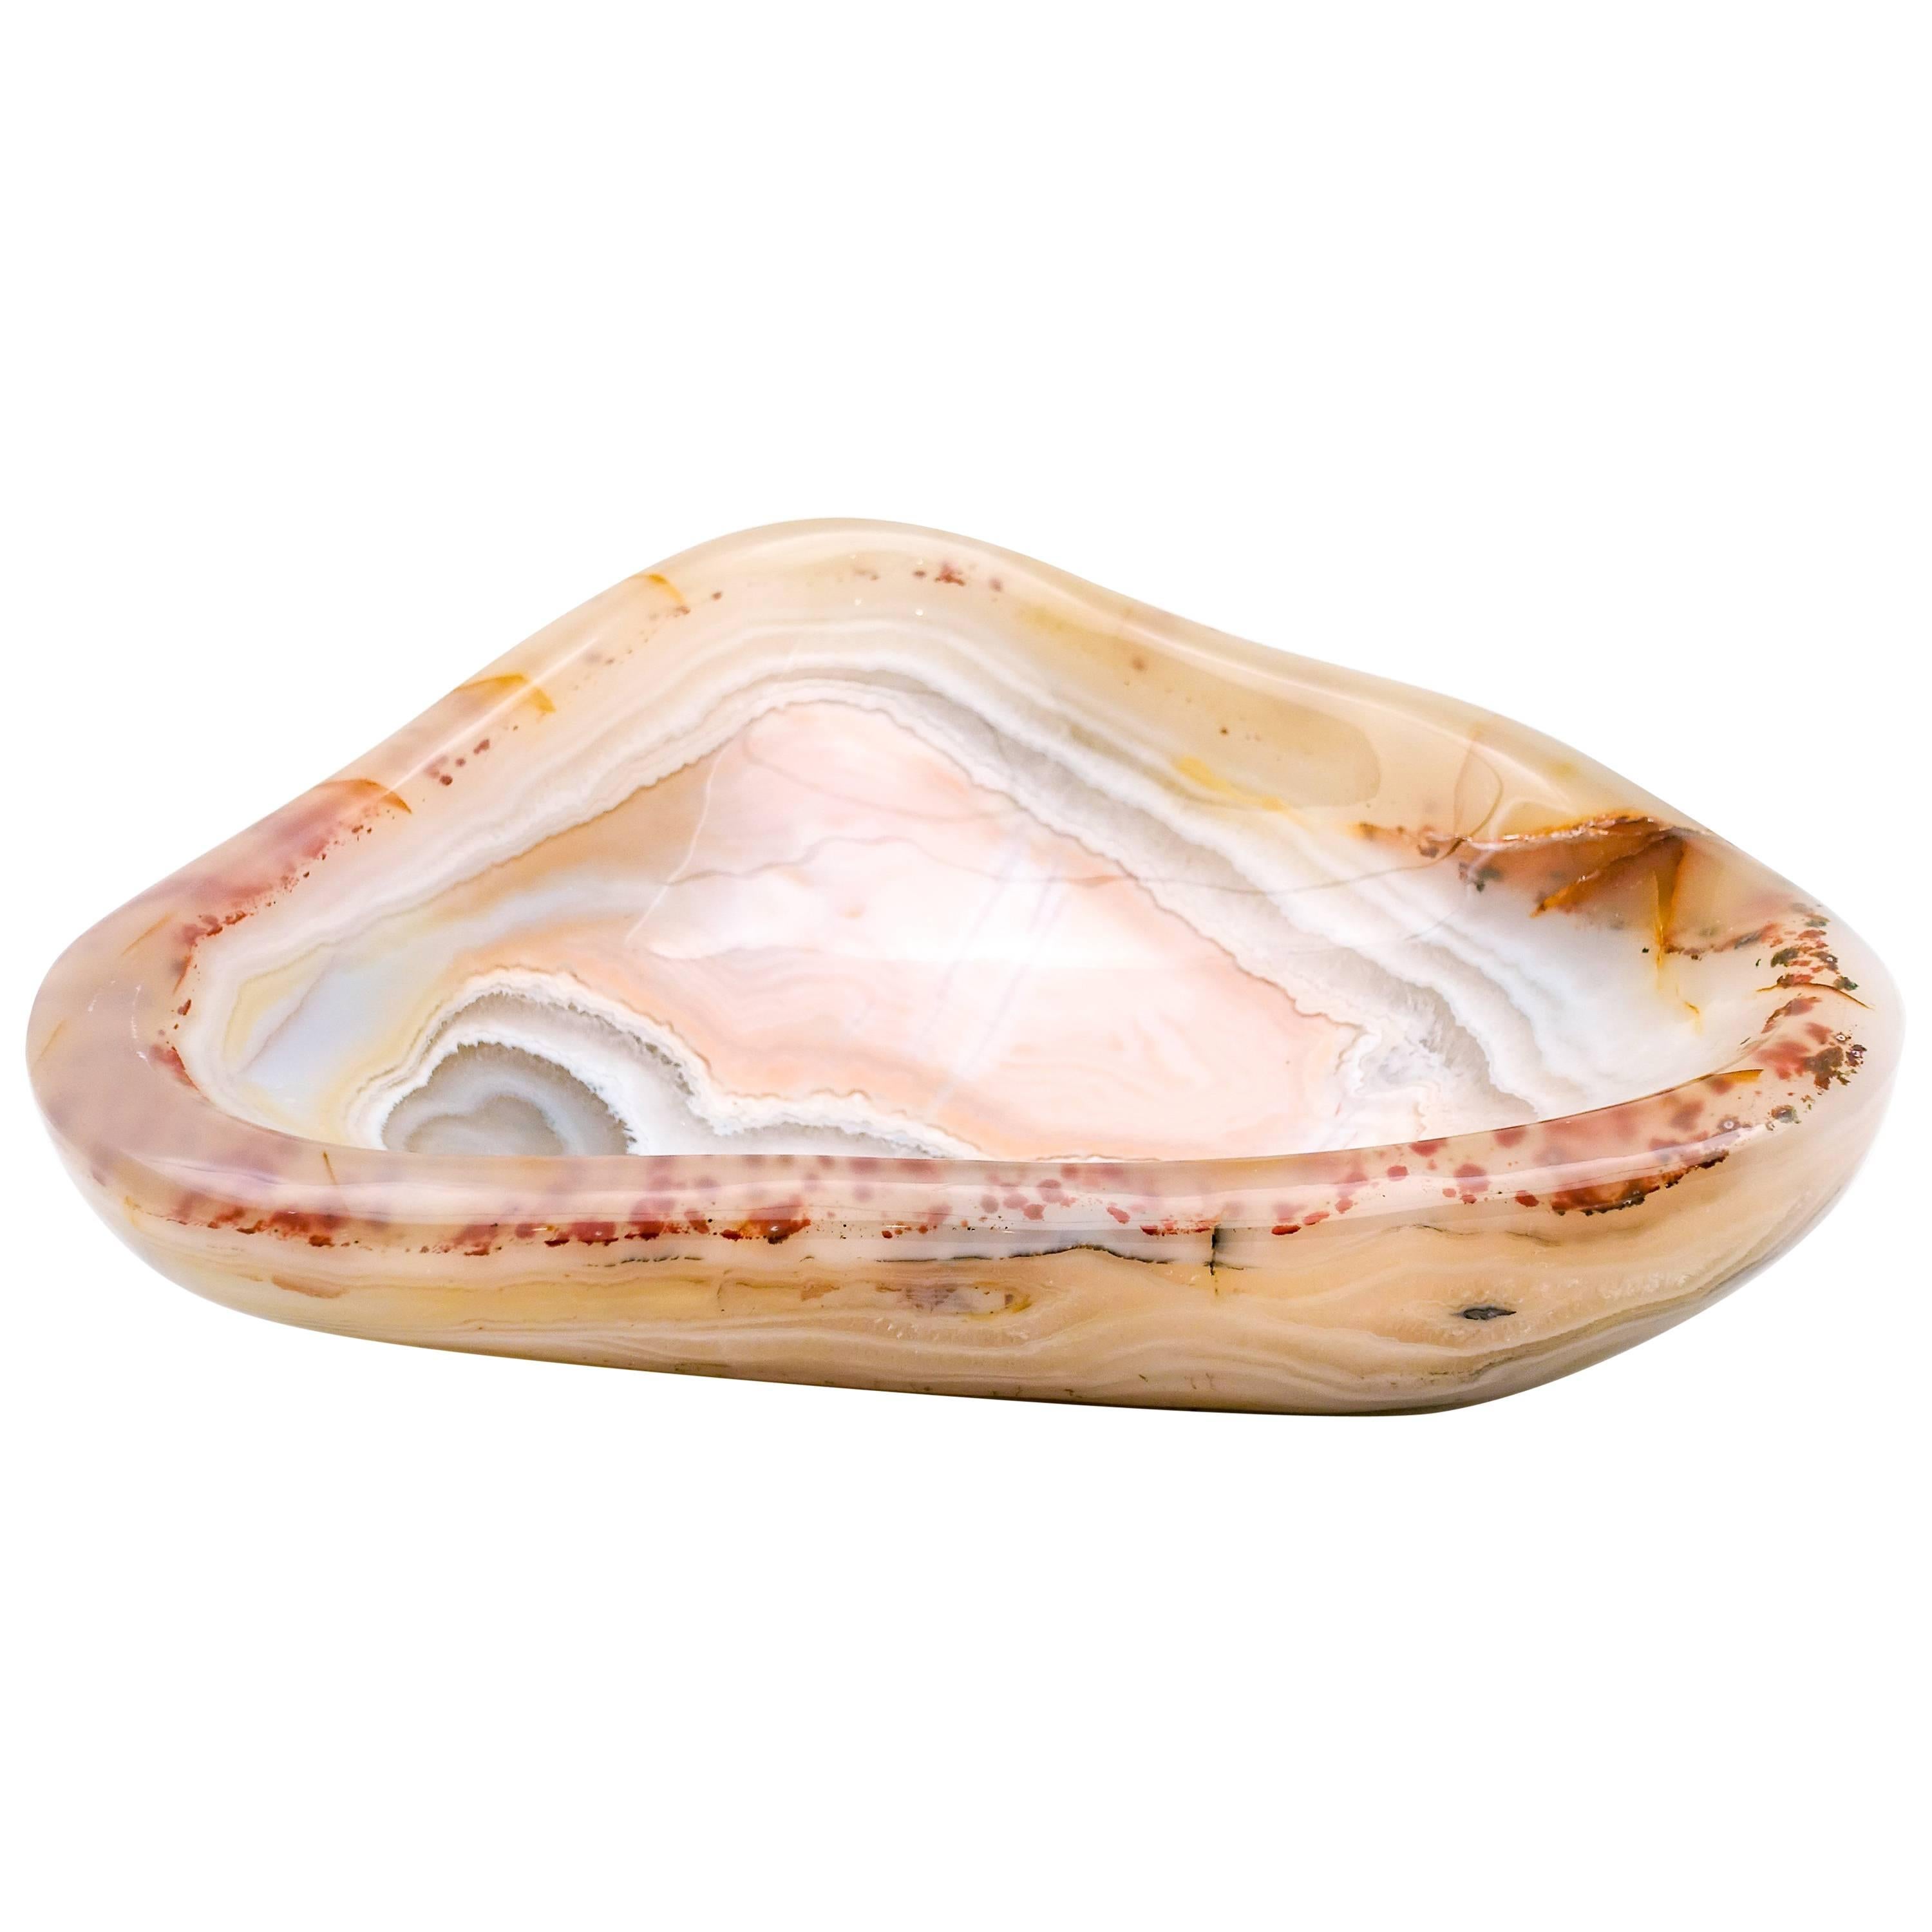 Agate Vide Poche Bowl, Rare and Large in Size, Hand-Carved in Madagascar